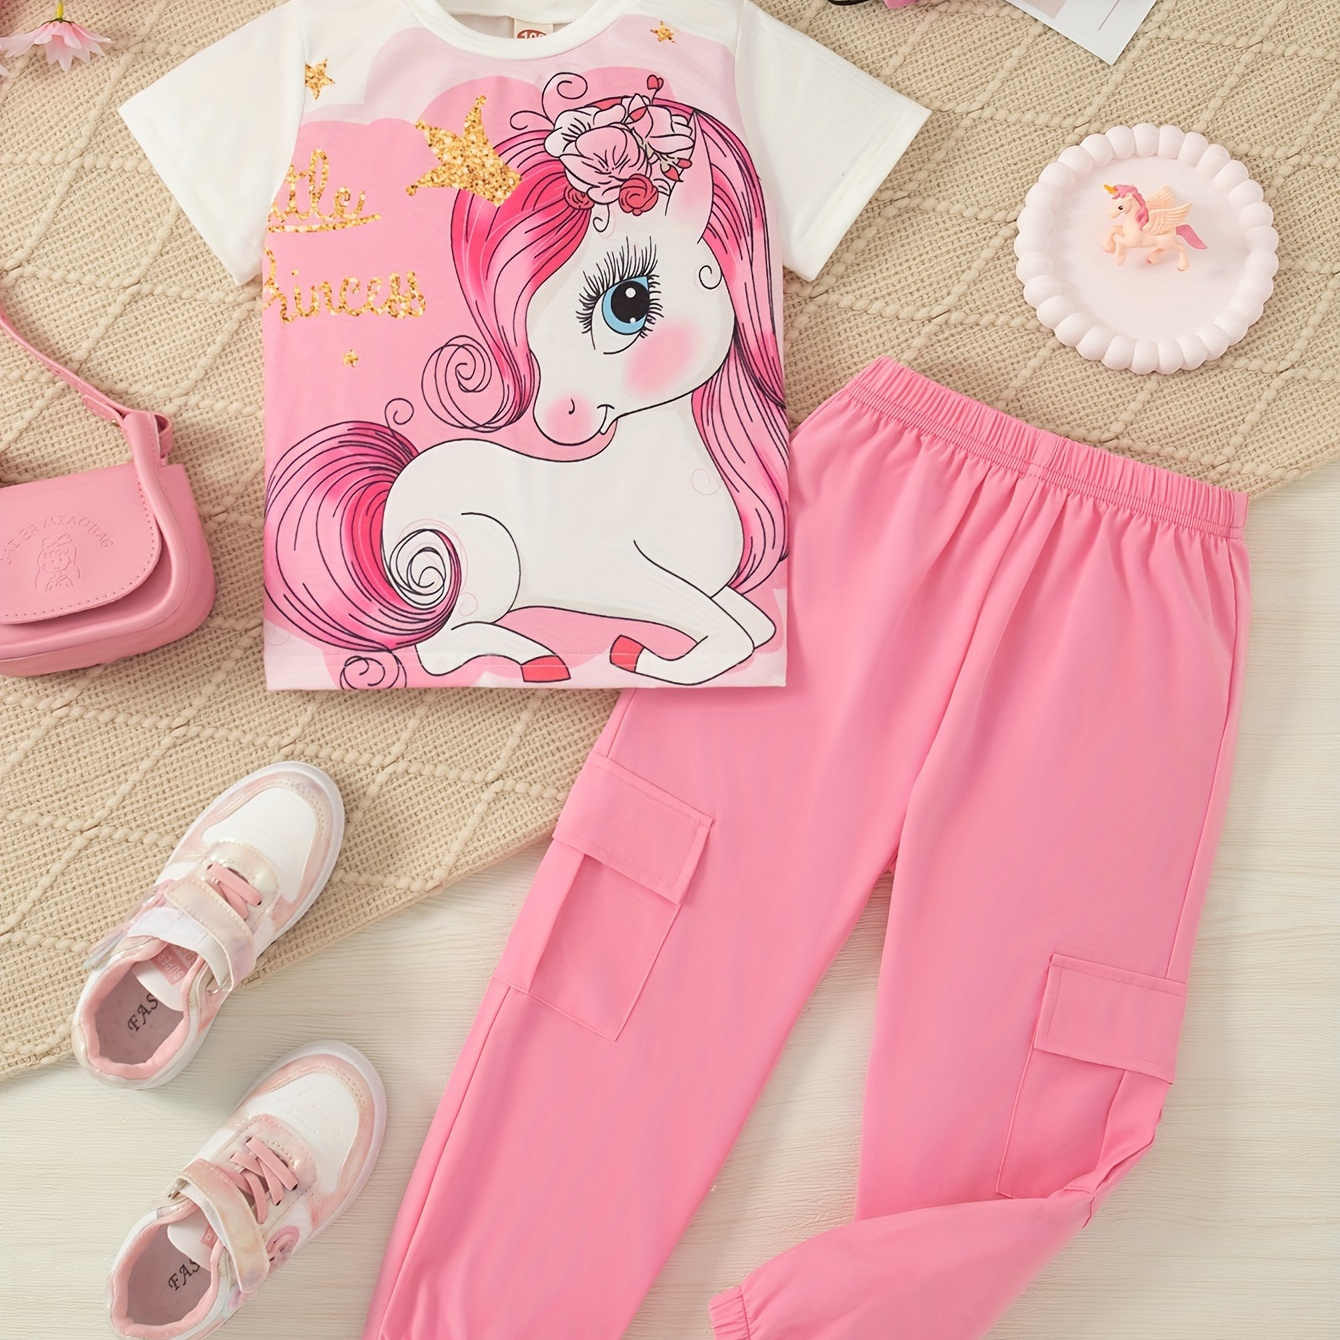 

Cutie Unicorn Print Girl's 2pcs Graphic Top + Basic Cargo Pants Casual Set, Girls Outfit Summer Clothes